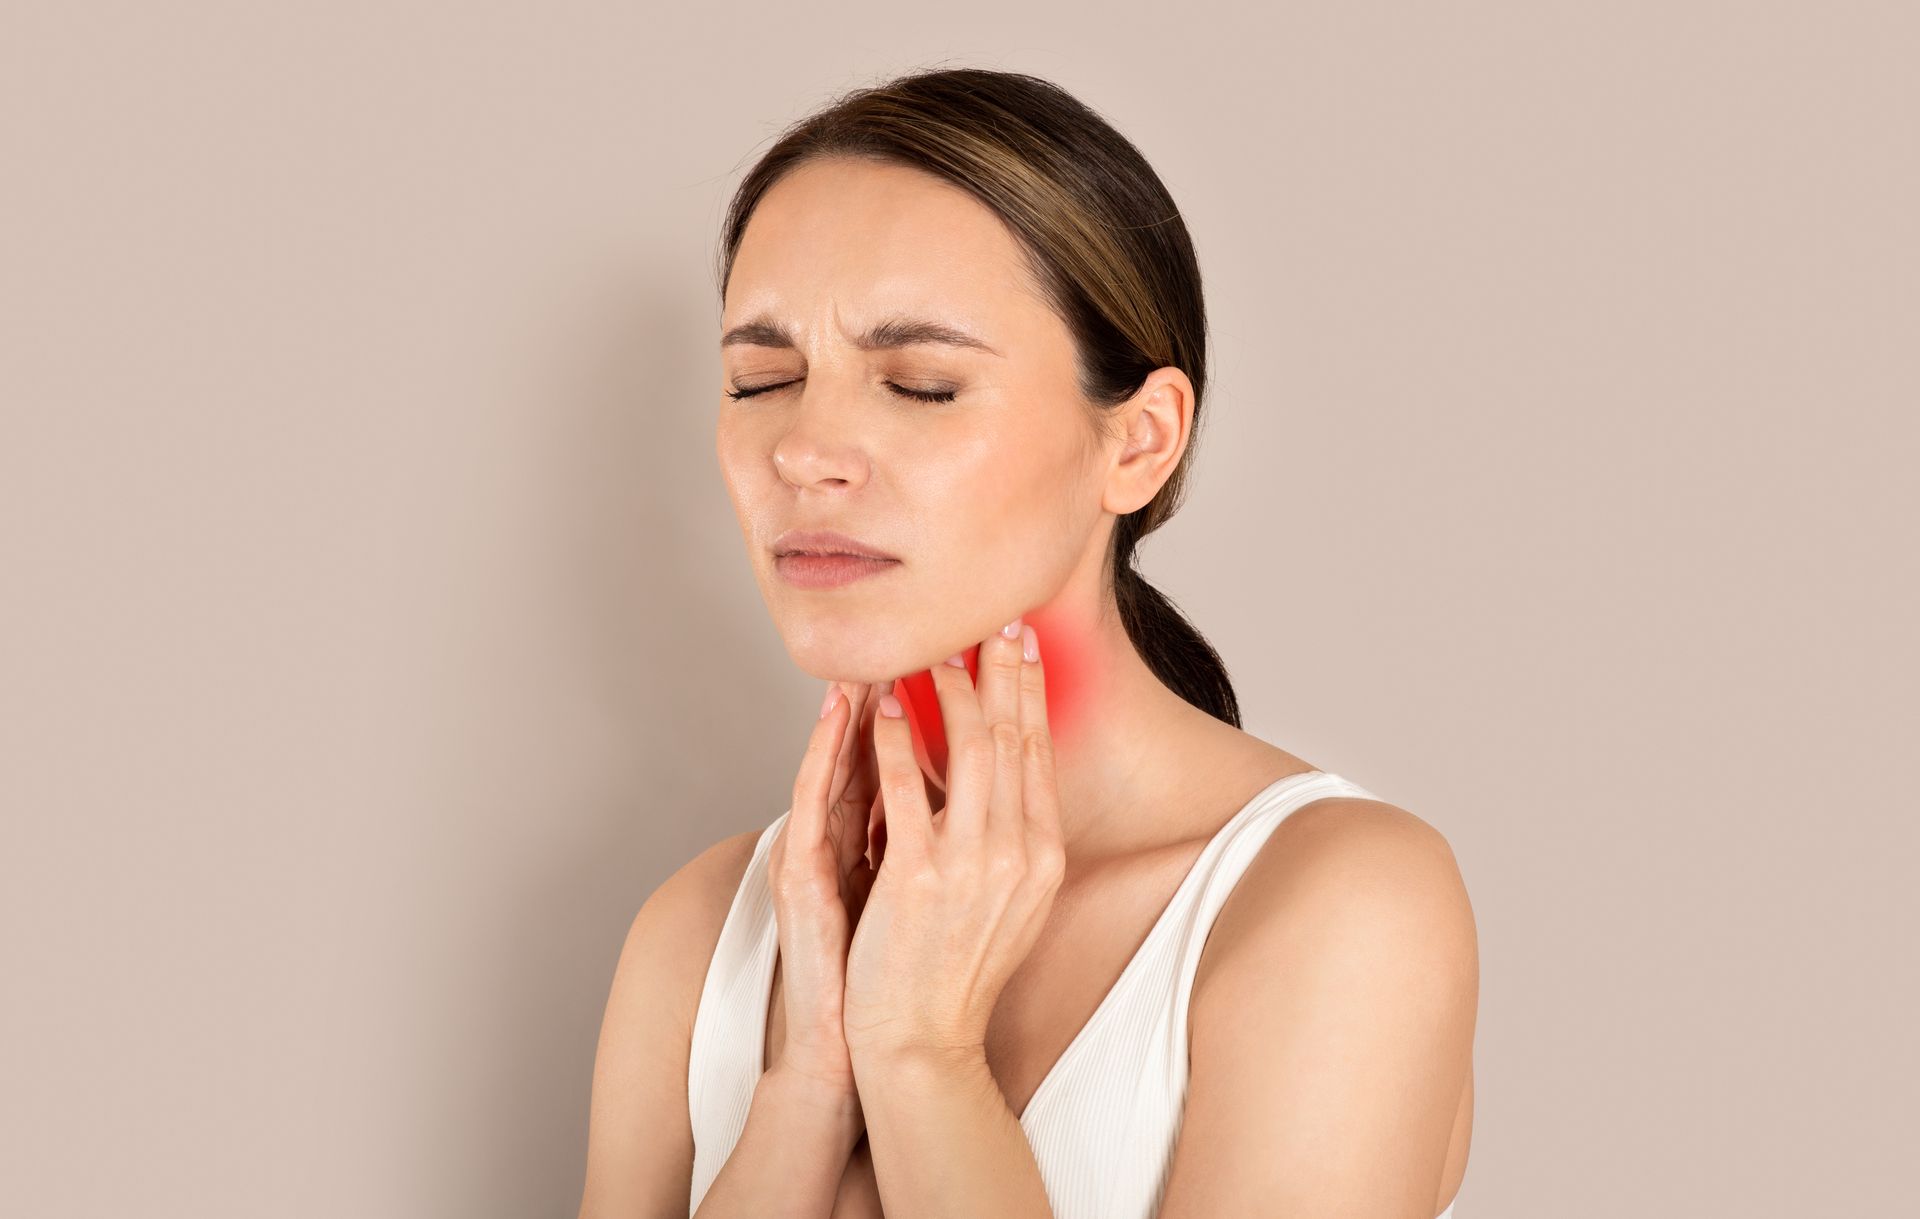 woman suffering from thyroid issues